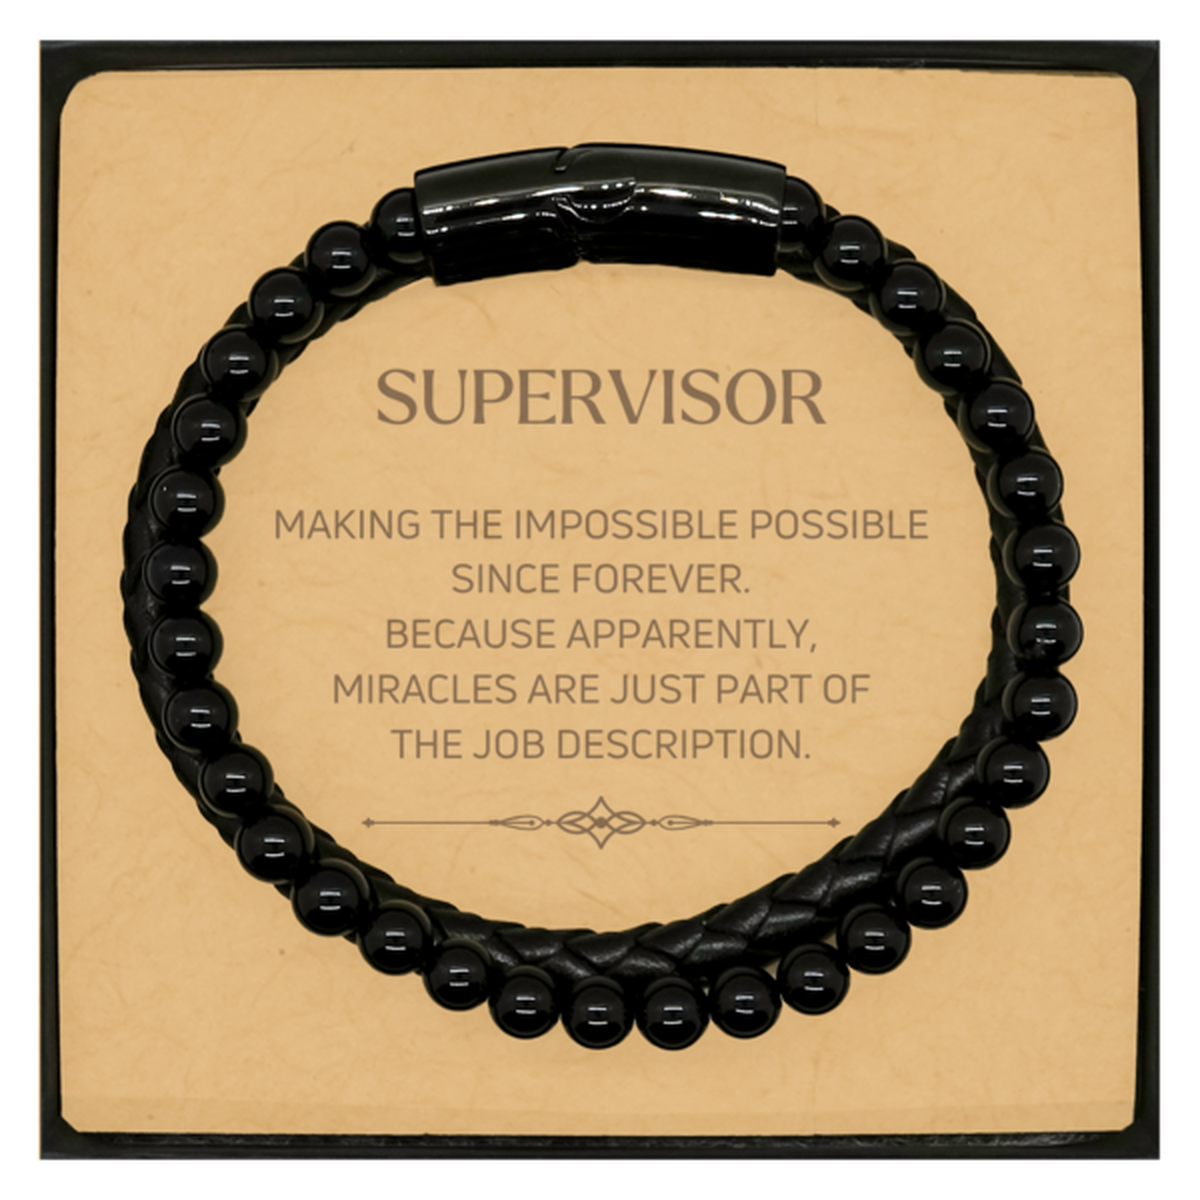 Funny Supervisor Gifts, Miracles are just part of the job description, Inspirational Birthday Christmas Stone Leather Bracelets For Supervisor, Men, Women, Coworkers, Friends, Boss